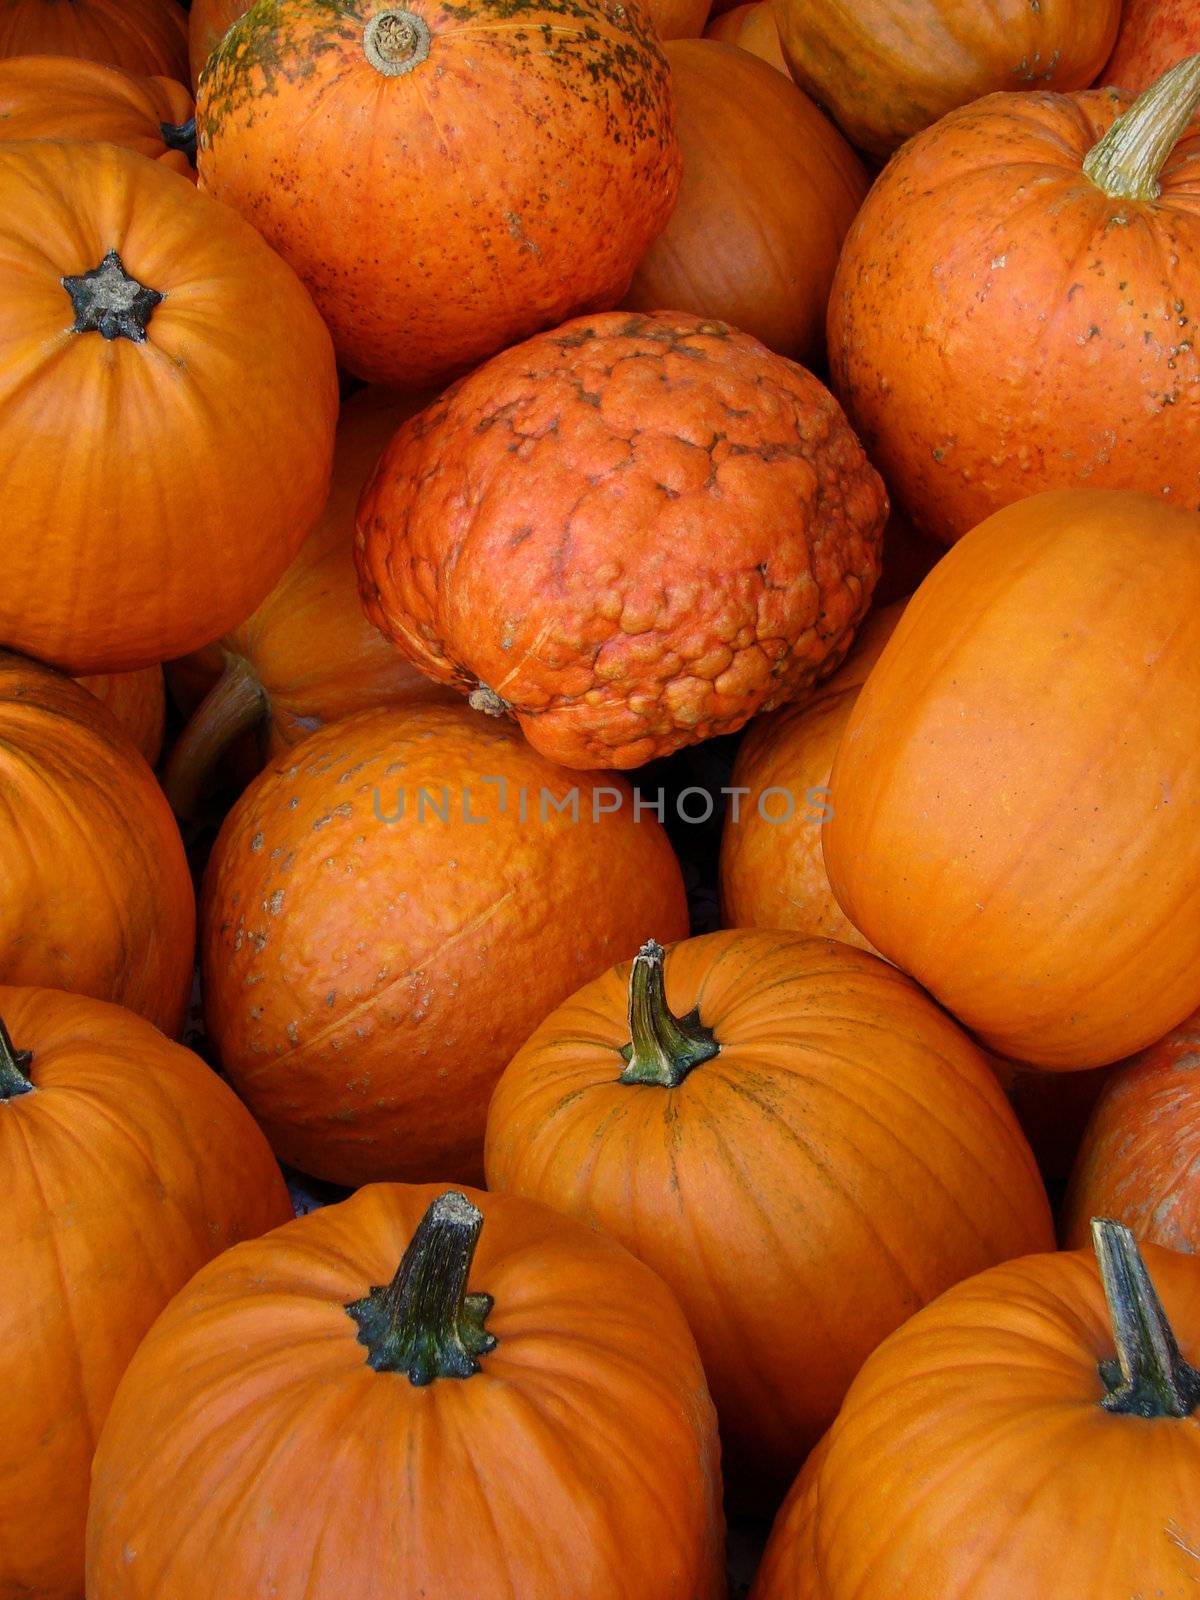 Small Pumpkins by Thorvis